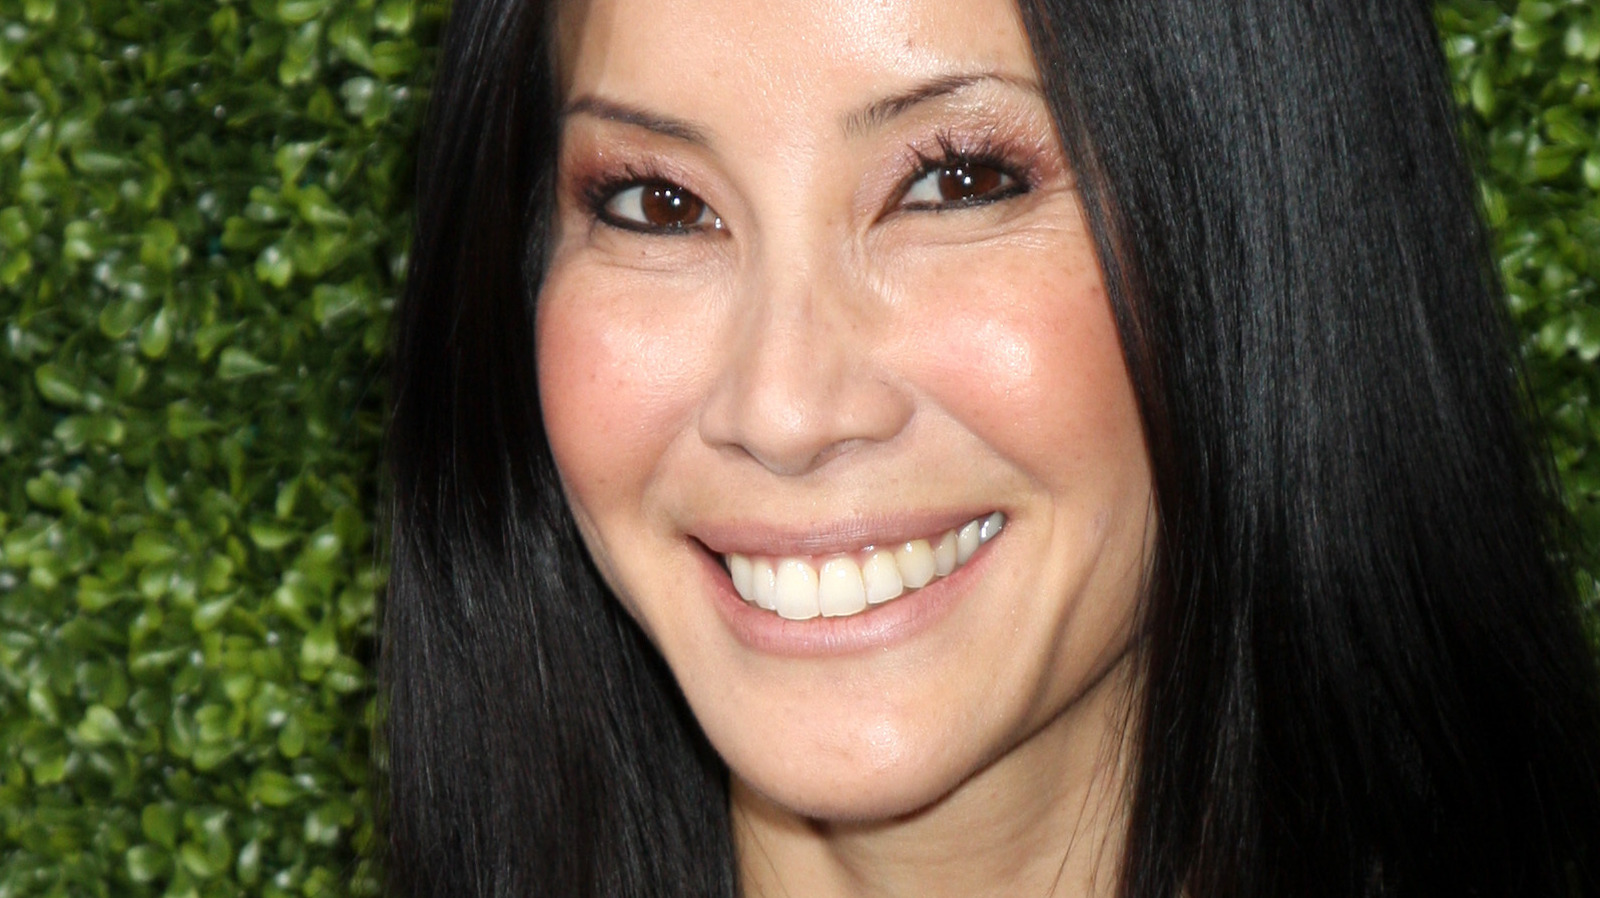 The View’s Former Co-Host Lisa Ling Recalls Behind-The-Scenes Struggle